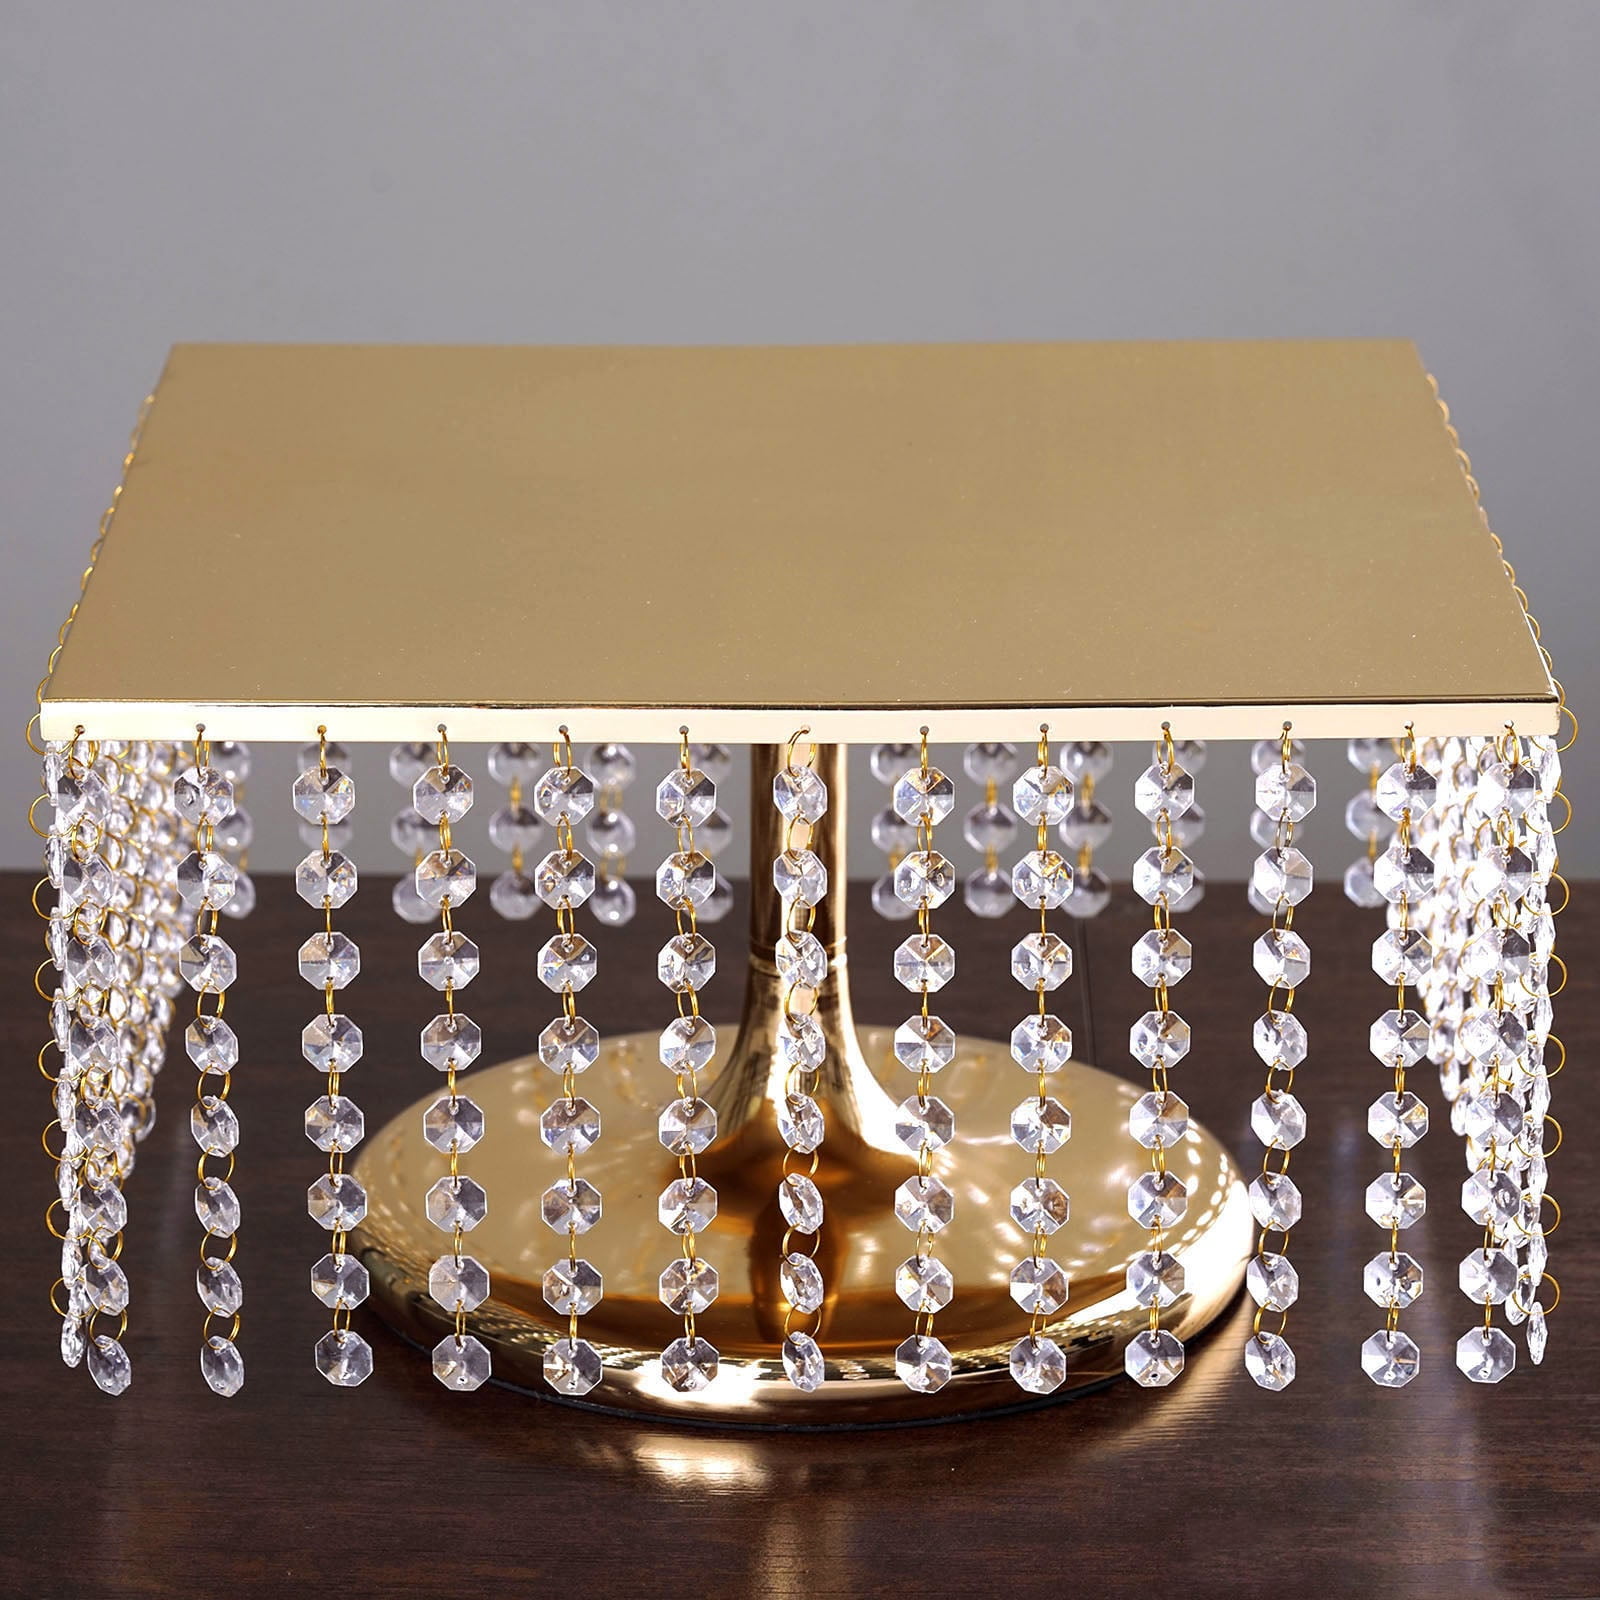 16" Bejeweled Gold Square Crystal Beaded Wedding Birthday Party Cake Stand 